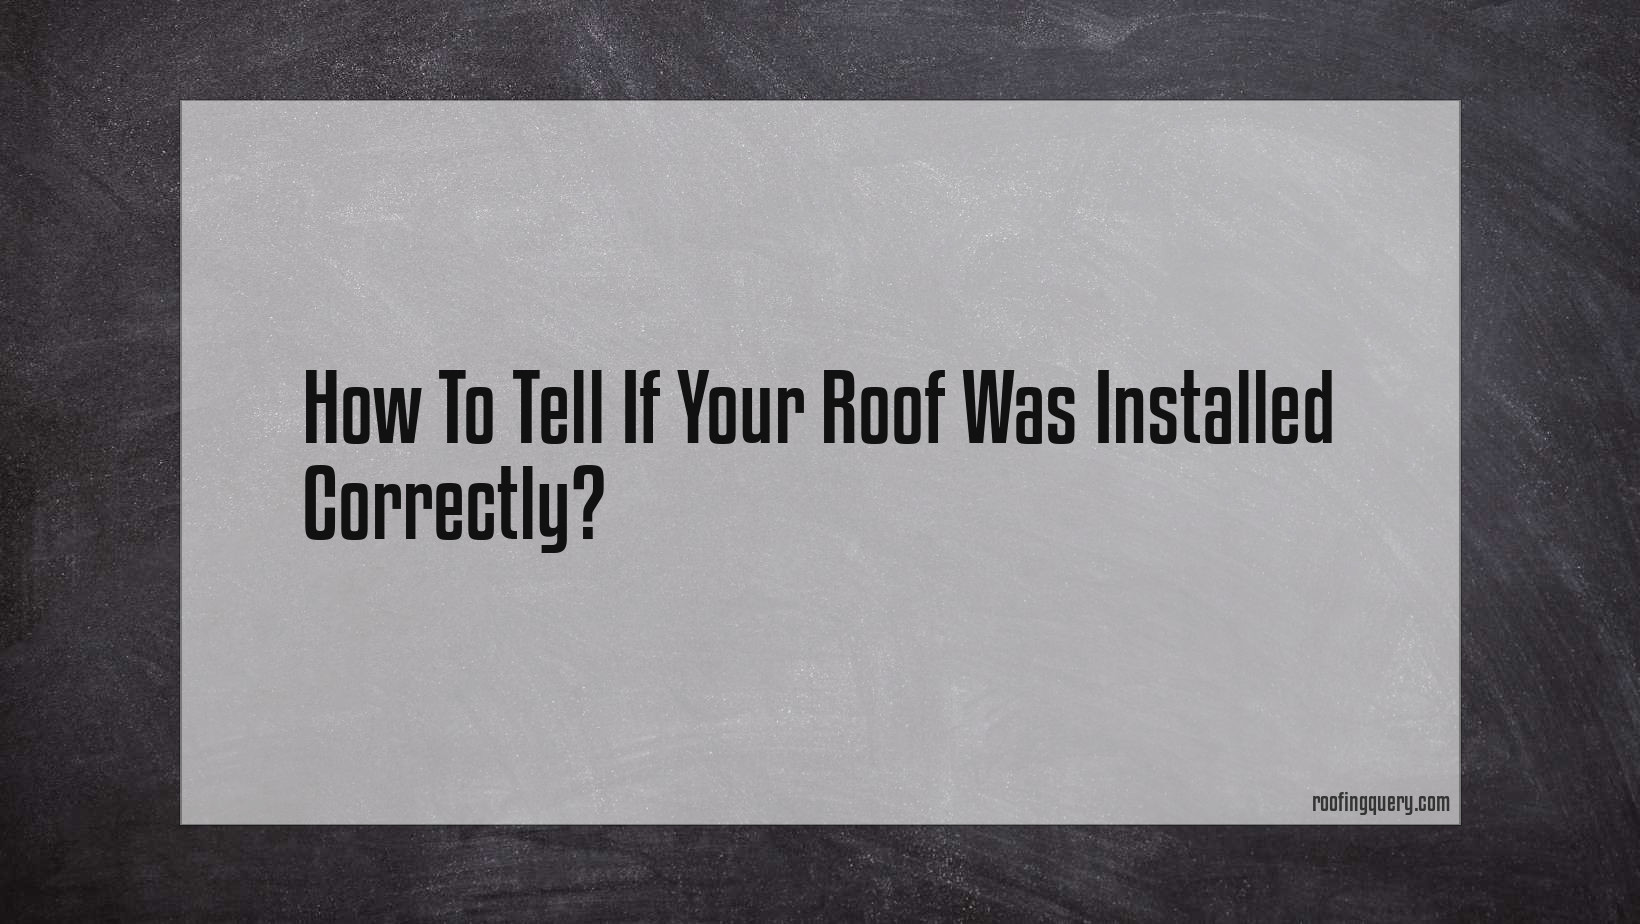 How To Tell If Your Roof Was Installed Correctly?